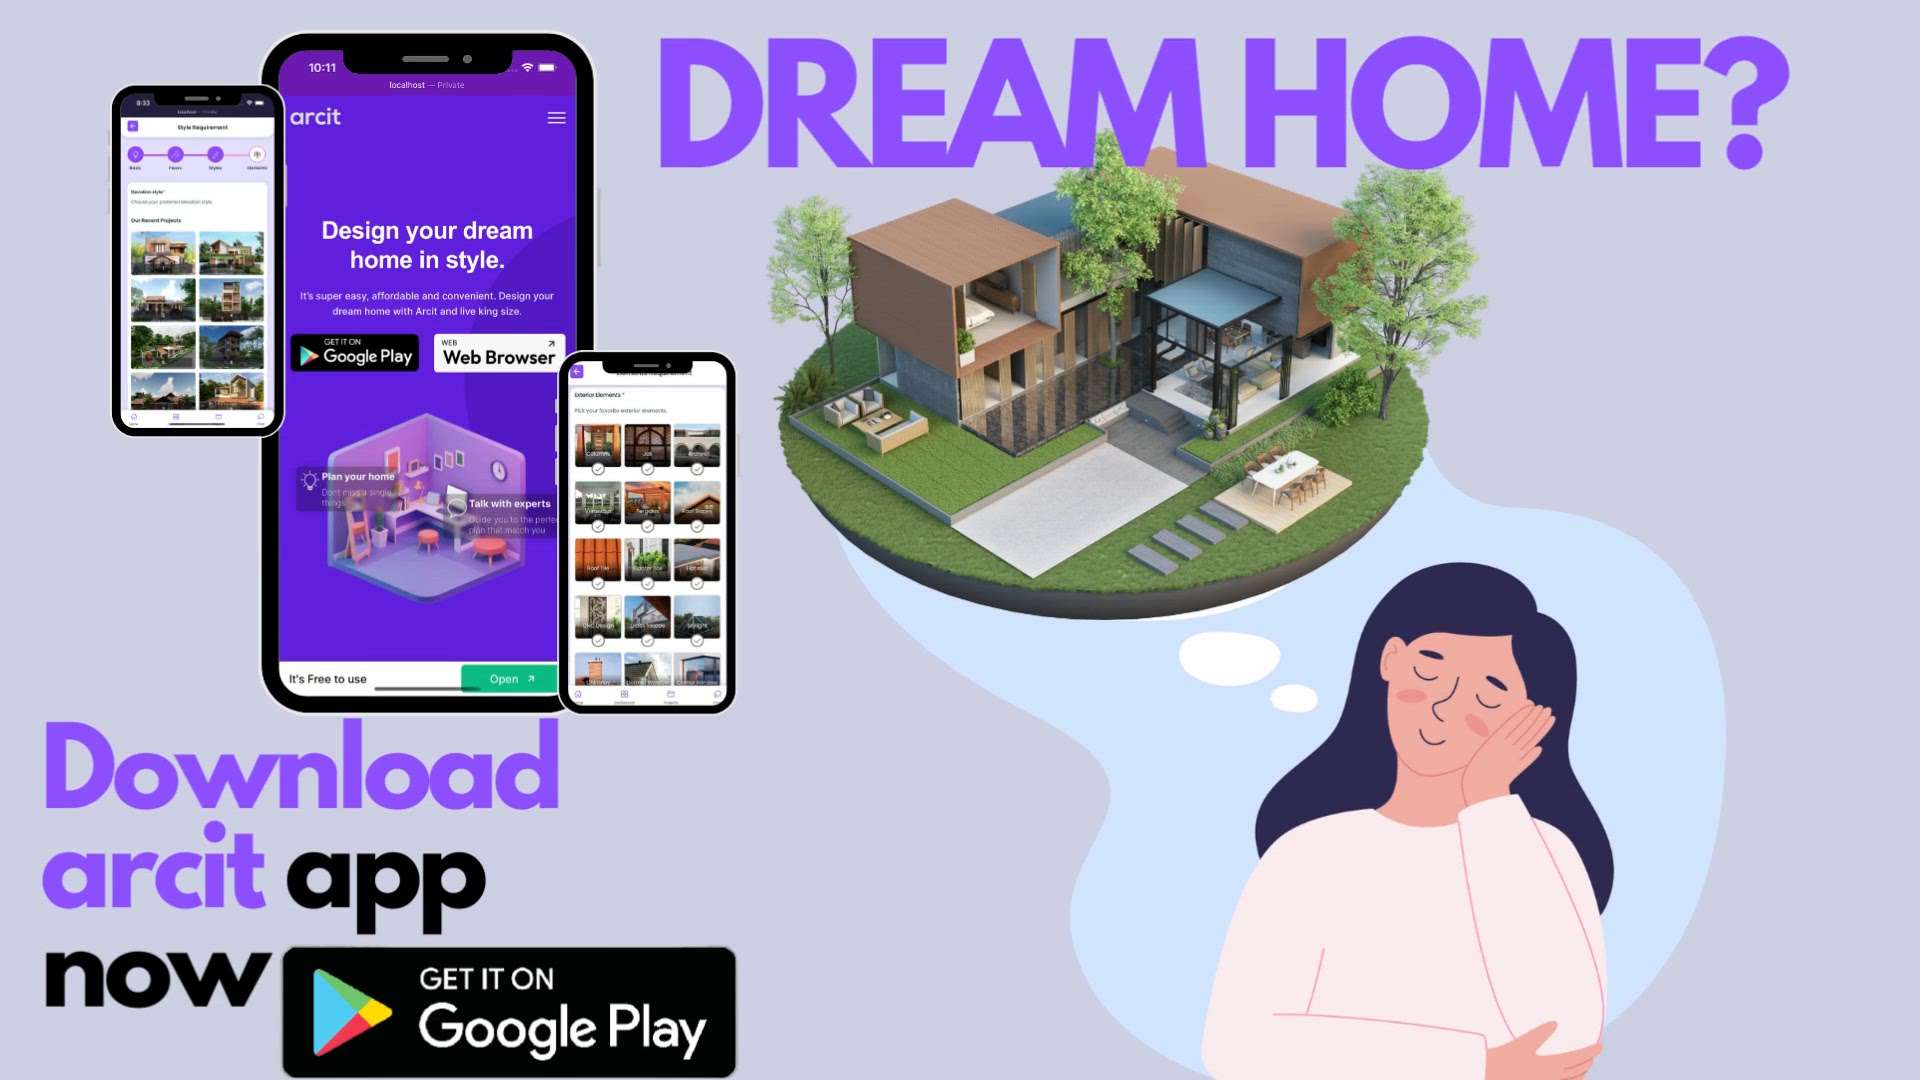 Download Arcit app now!
Design your dream home now



#Architect 
#homeinterior 
#HouseDesigns 
#budget 
#KeralaStyleHouse 
#style 
#modernhouses 
#TraditionalHouse 
#contemperoryhomes 
#contemperory 
#Designs
#HouseRenovation 
#budget 
#budgethomez 
#budgethomez 
#budgethome
#InteriorDesigner 
#interior
#budget_home_simple_interi 
#budget home
#budgethomeplan 
#SmallBudgetRenovation 
#budgethouses
#ElevationHome 
#ElevationDesign 
#3d 
#3dhouse 
#3delevations 
#3delevation🏠🏡 
#exteriors 
#exteriors 
#exterior_Work 
#stilt+4exteriordesign 
#3DPlans 
#2DPlans 
#frontElevation 
#frontelevationdesign 
#frontfacade
#modernhouses 
#TraditionalHouse 
#contemperoryhomes 
#contemperory 
#Designs
#HouseRenovation 
#budget 
#budgethomez 
#budgethomez 
#budgethome
#InteriorDesigner 
#interior
#budget_home_simple_interi 
#budget home
#budgethomeplan 
#SmallBudgetRenovation 
#budgethouses
#HouseRenovation 
#new_home 
#architecturedesigns 
#Architect 
#ElevationHome